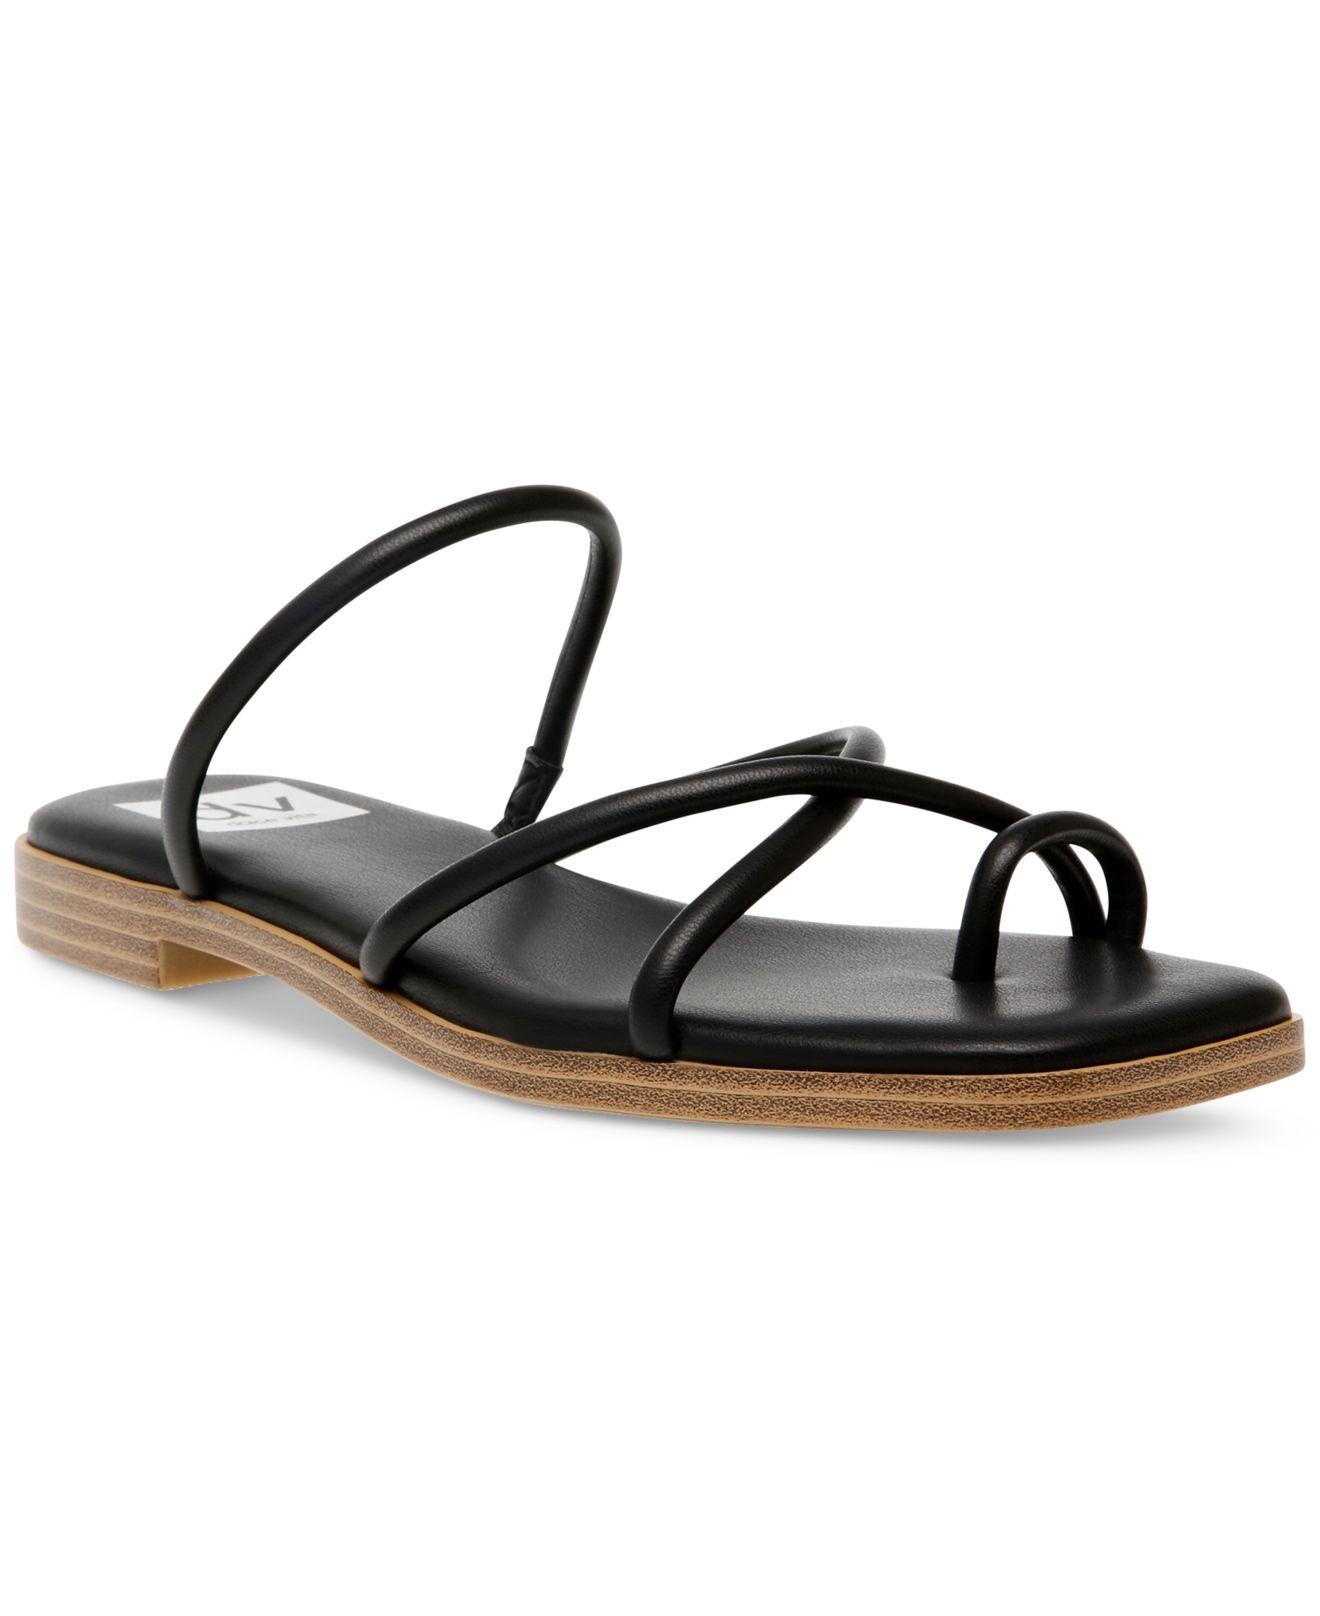 DV by Dolce Vita Milany Strappy Flat Sandals in Black | Lyst Canada